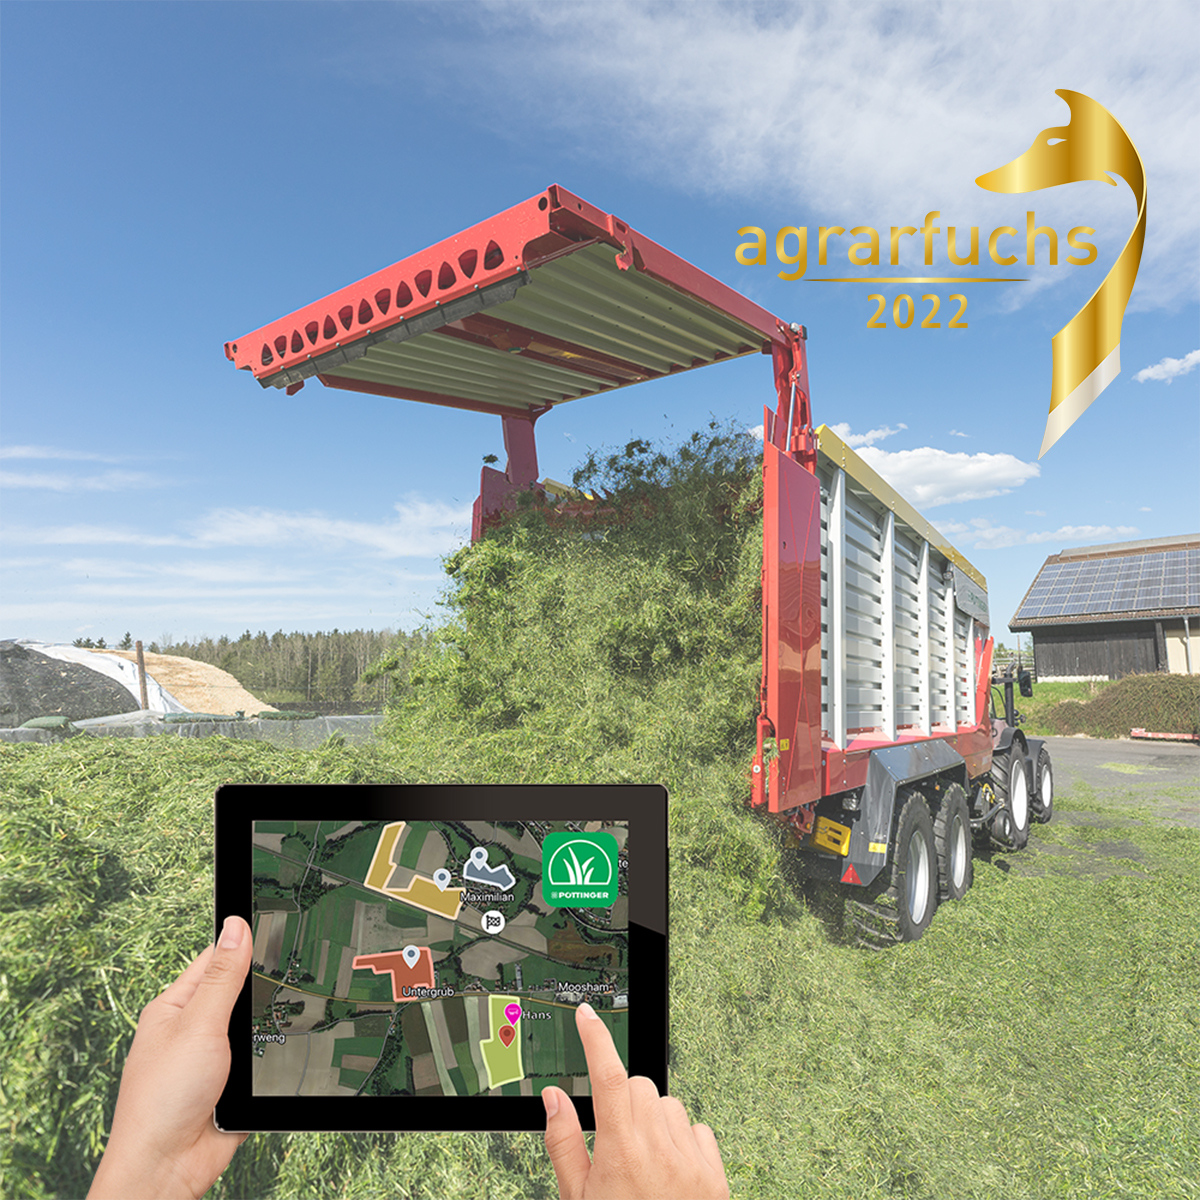 Agrarfuchs_Agraria_Messe_Wels_2022_Harvest_Assist